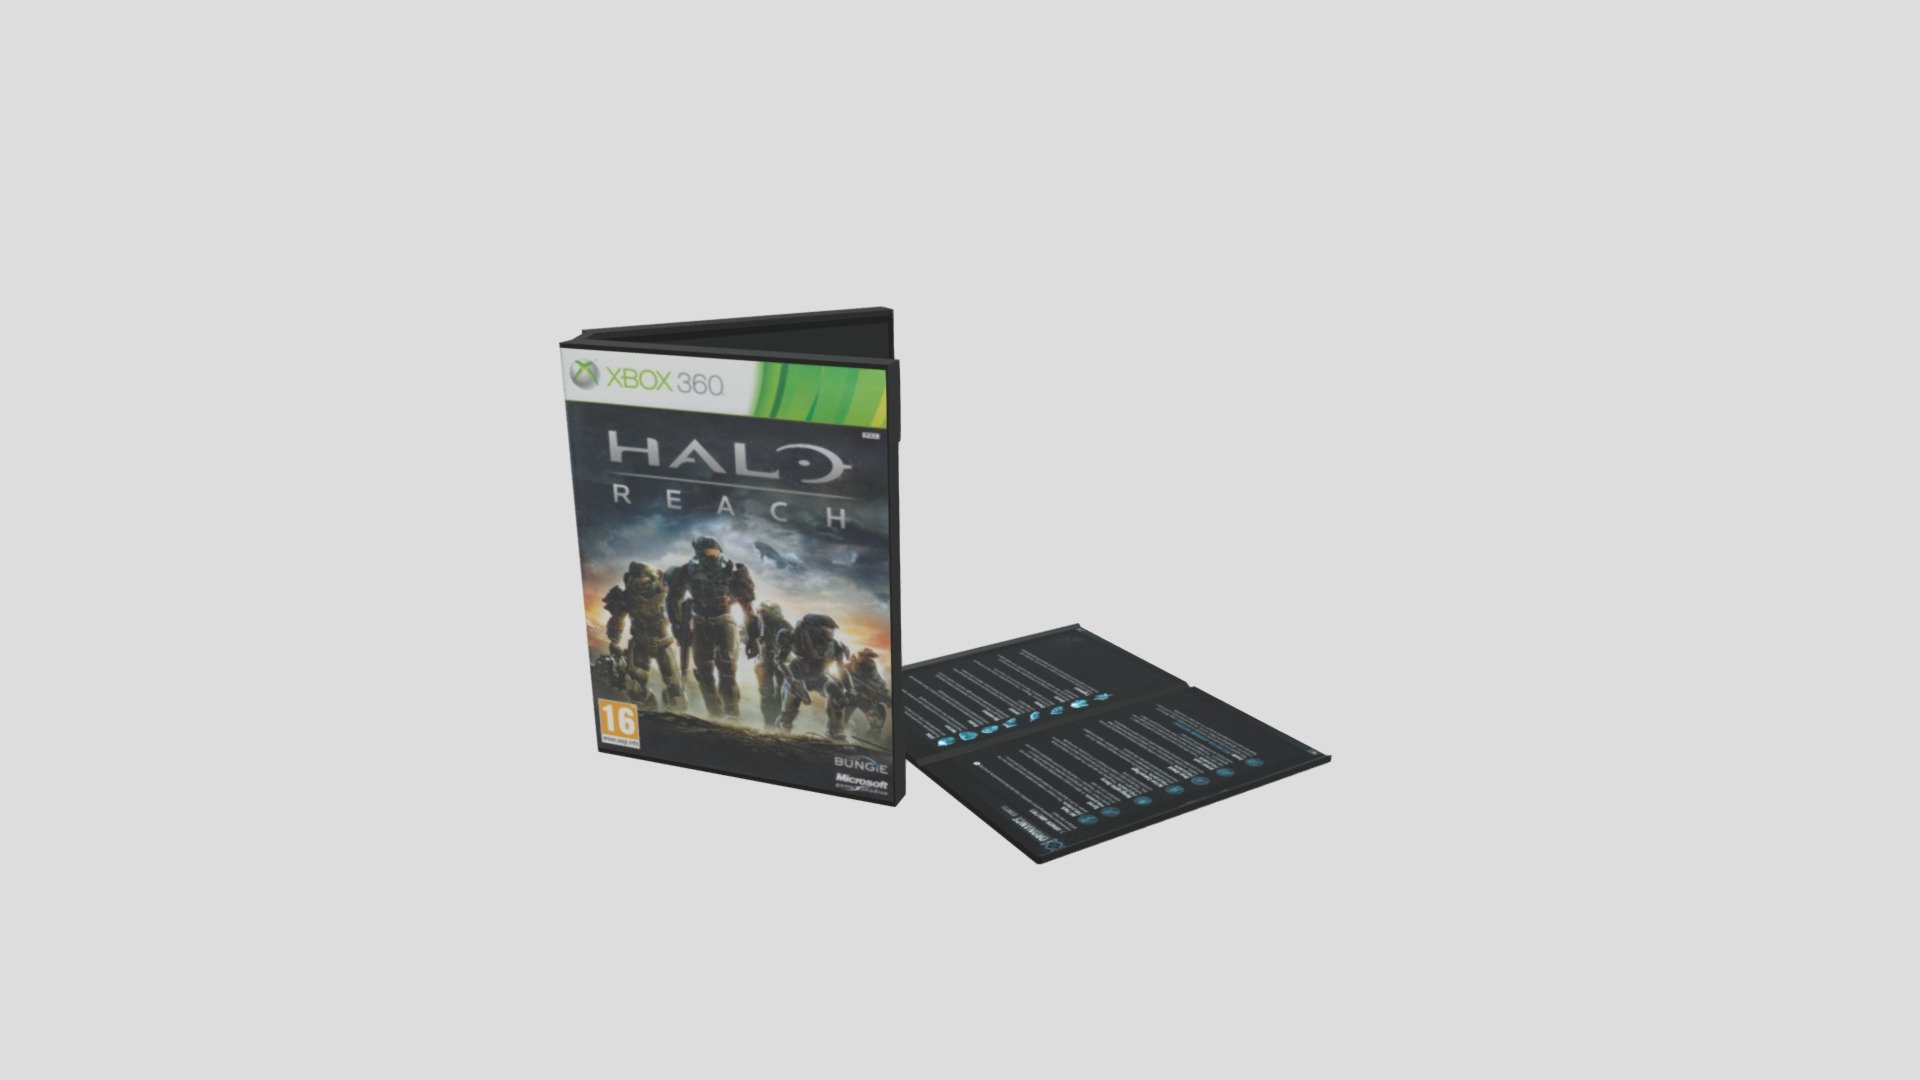 This is a model of the game case for Halo Reach including the game disk, Xbox live Gold code sheet and a Field Manual from Halo Reach - Halo Reach Video Game Case - 3D model by lucien lawson (@lucienlawson1) 3d model